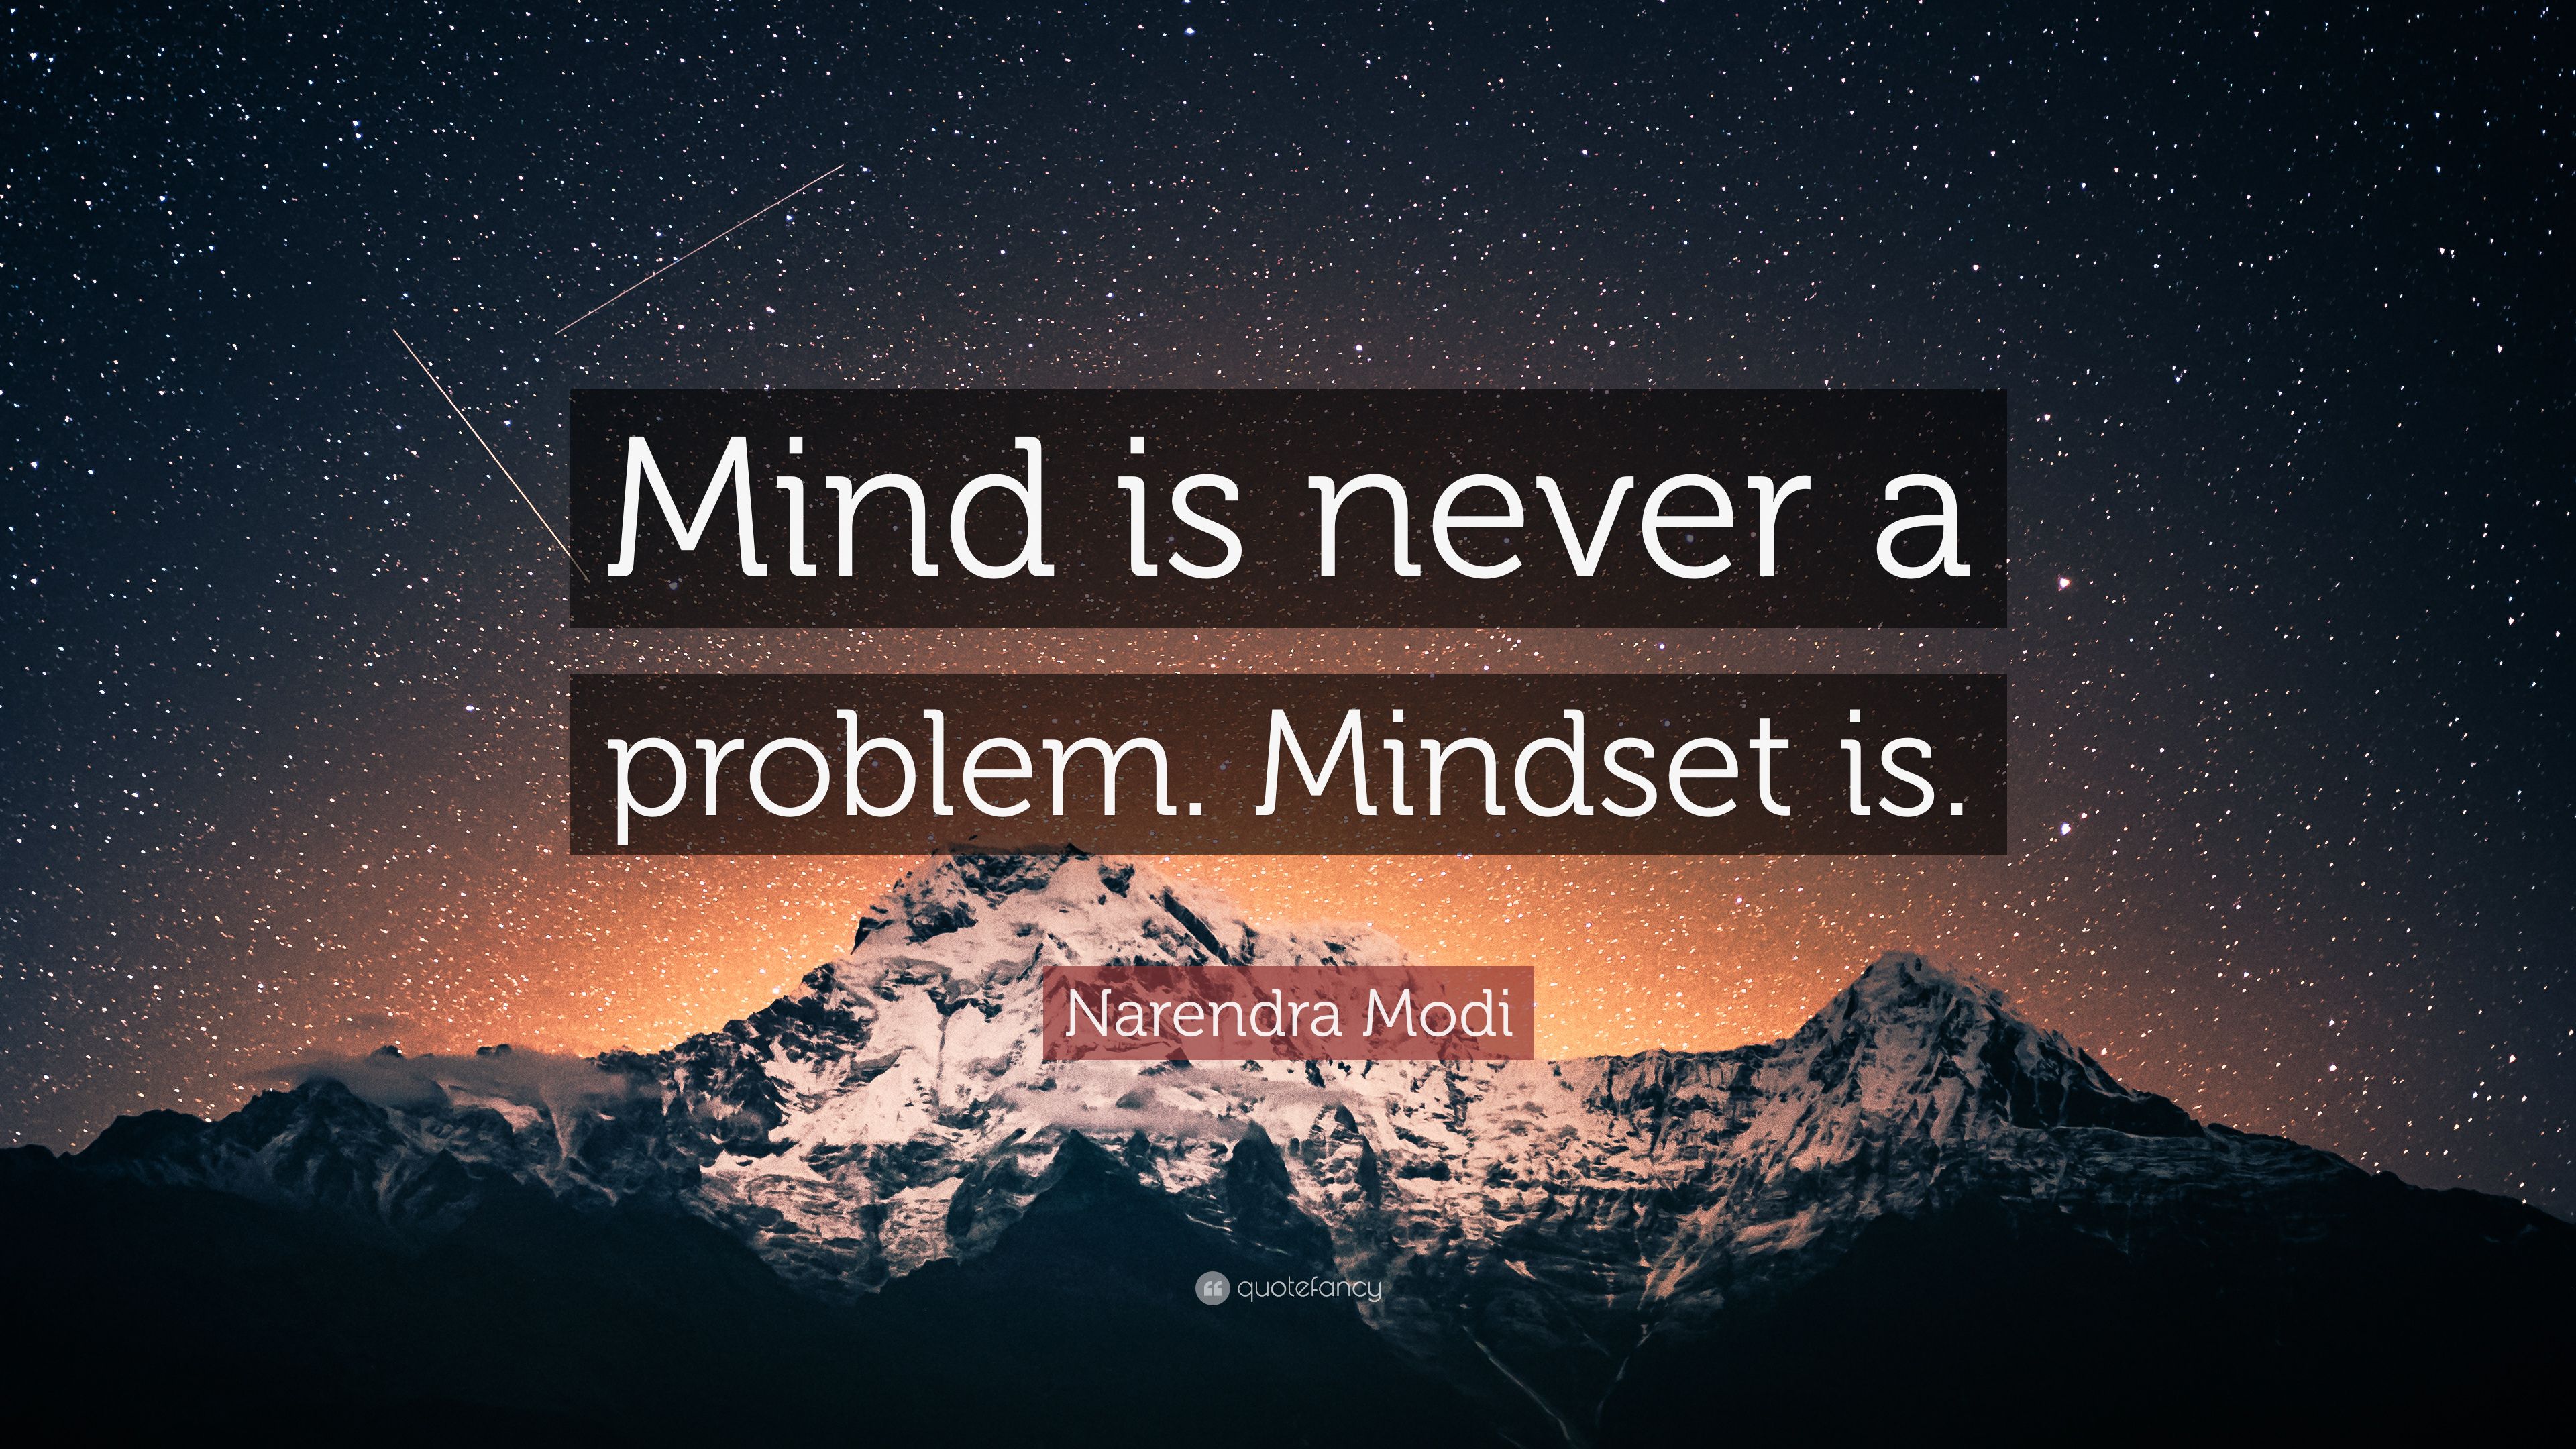 Narendra Modi Quote: “Mind is never a problem. Mindset is.” 12